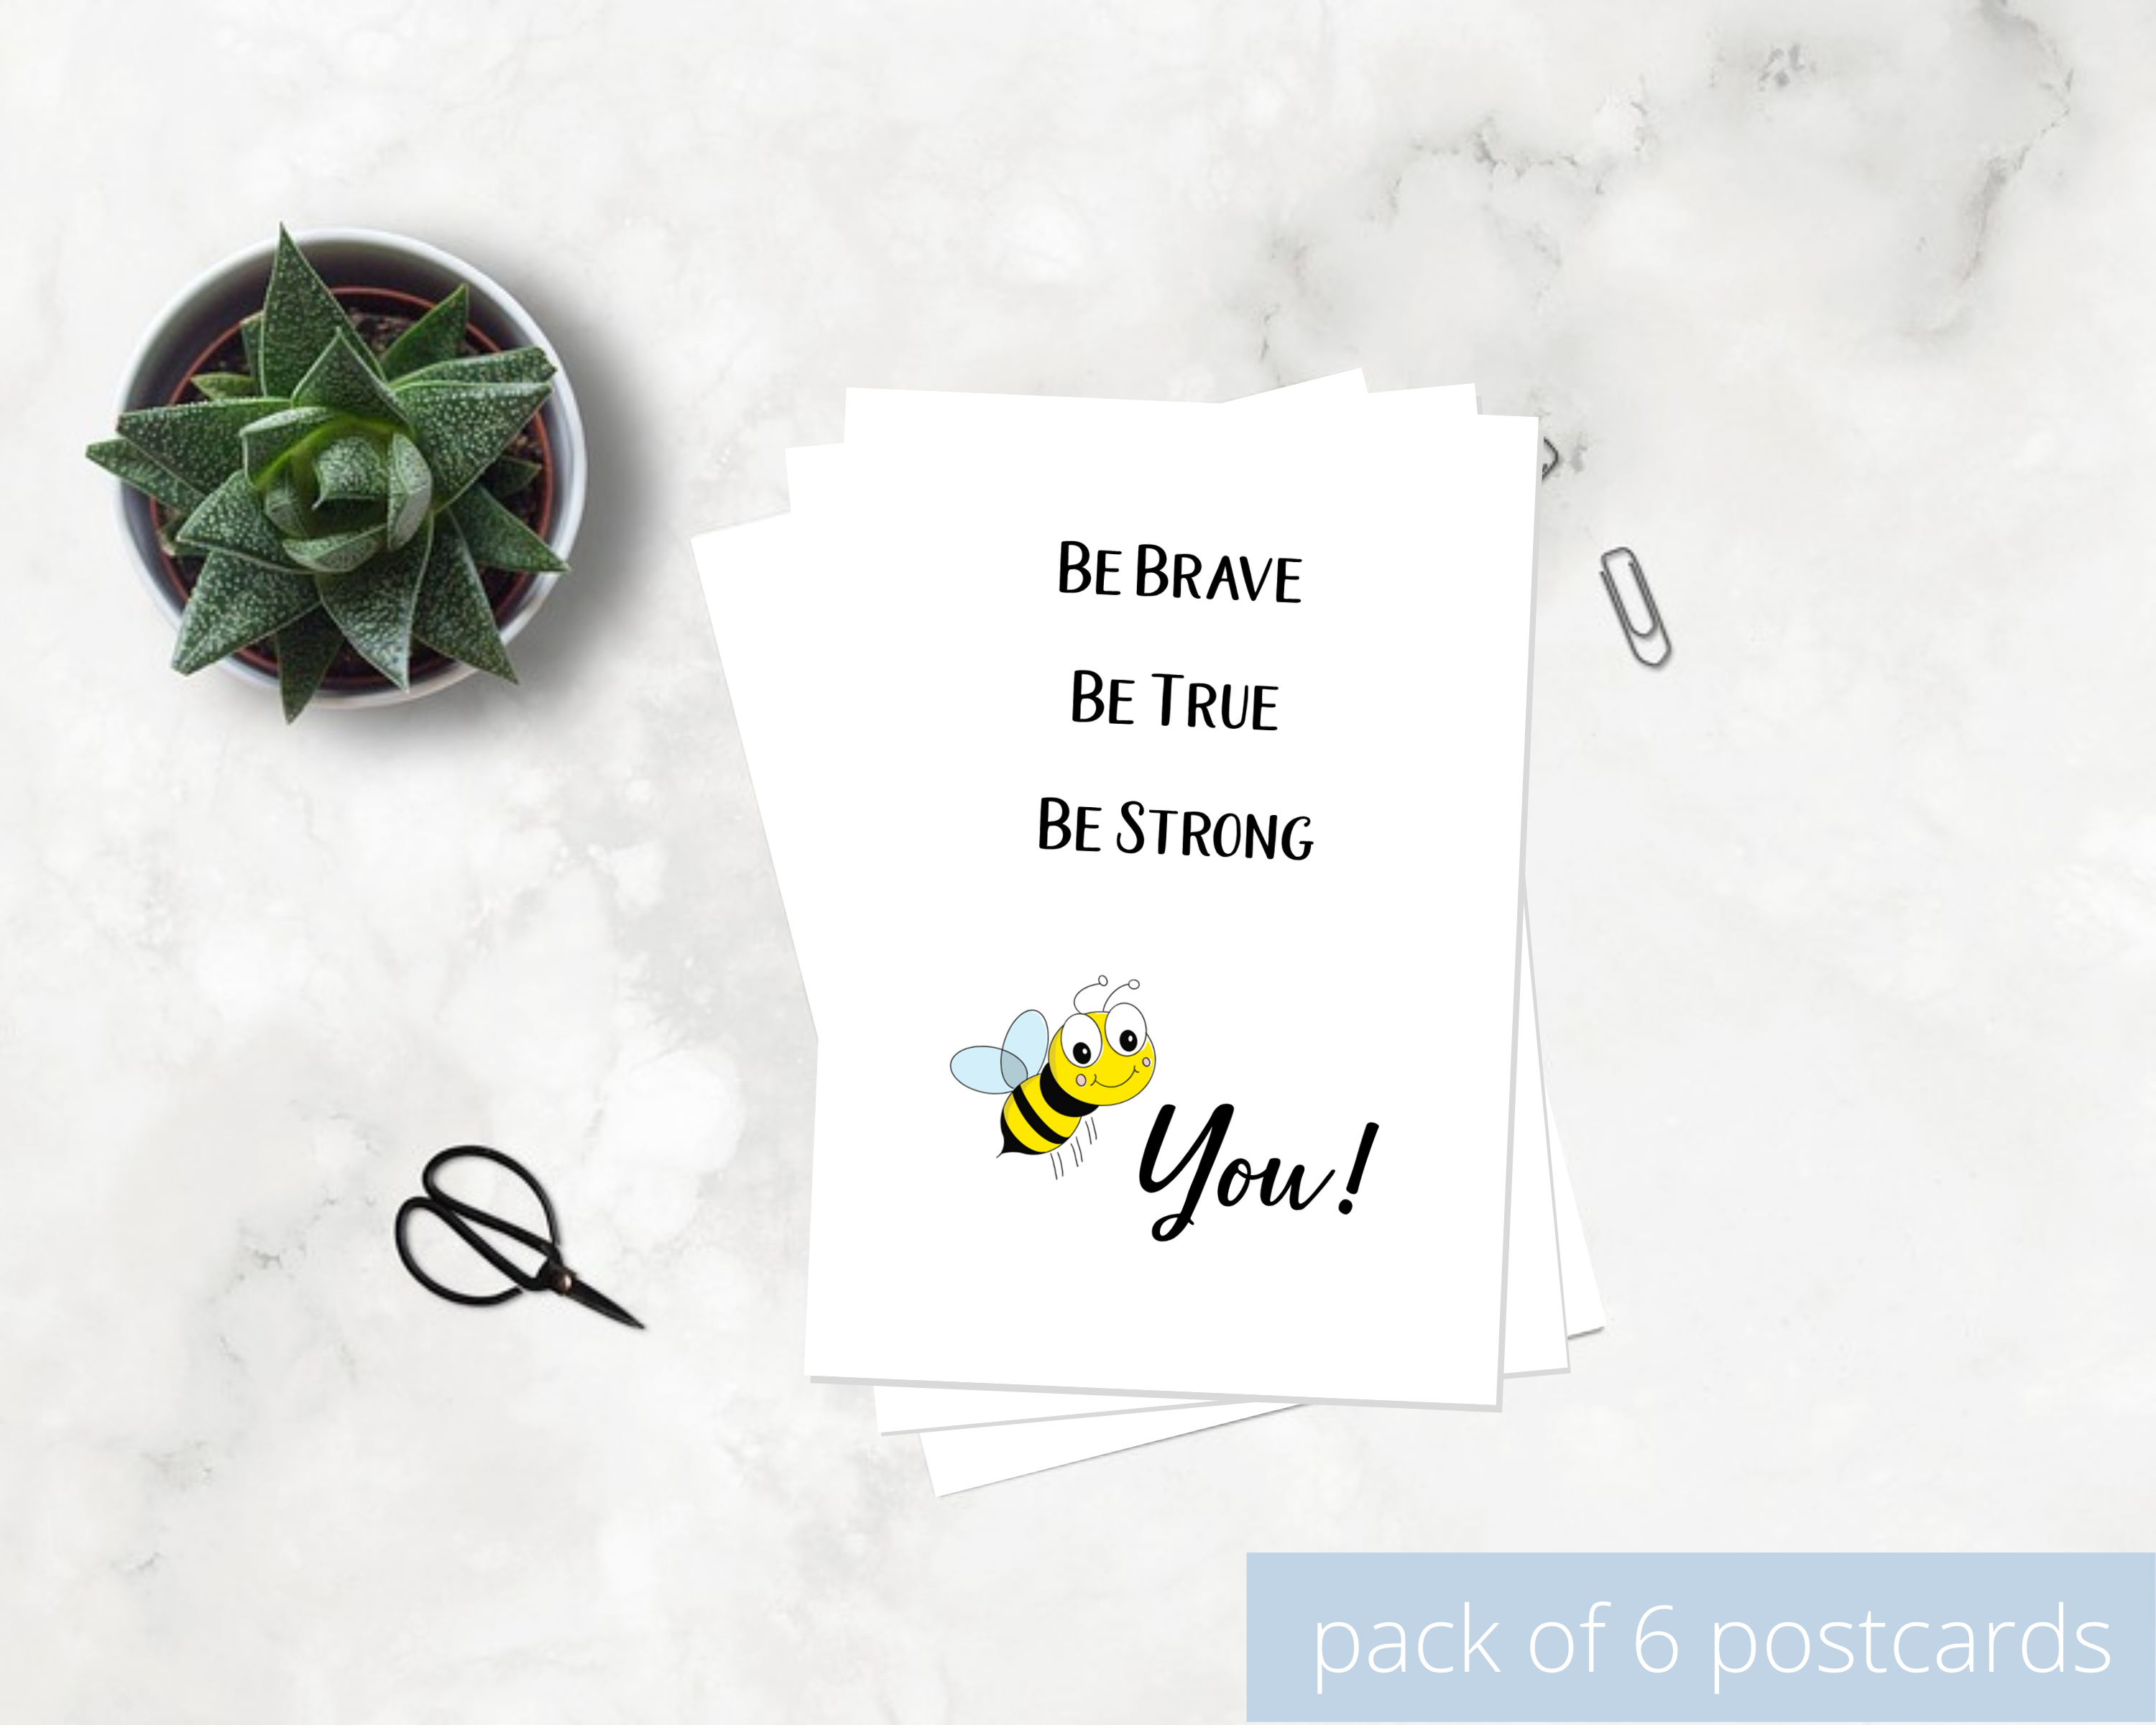 Poppleberry A6 positivity postcard, with a bright yellow digital bee illustration and uplifting message, on white cardstock.